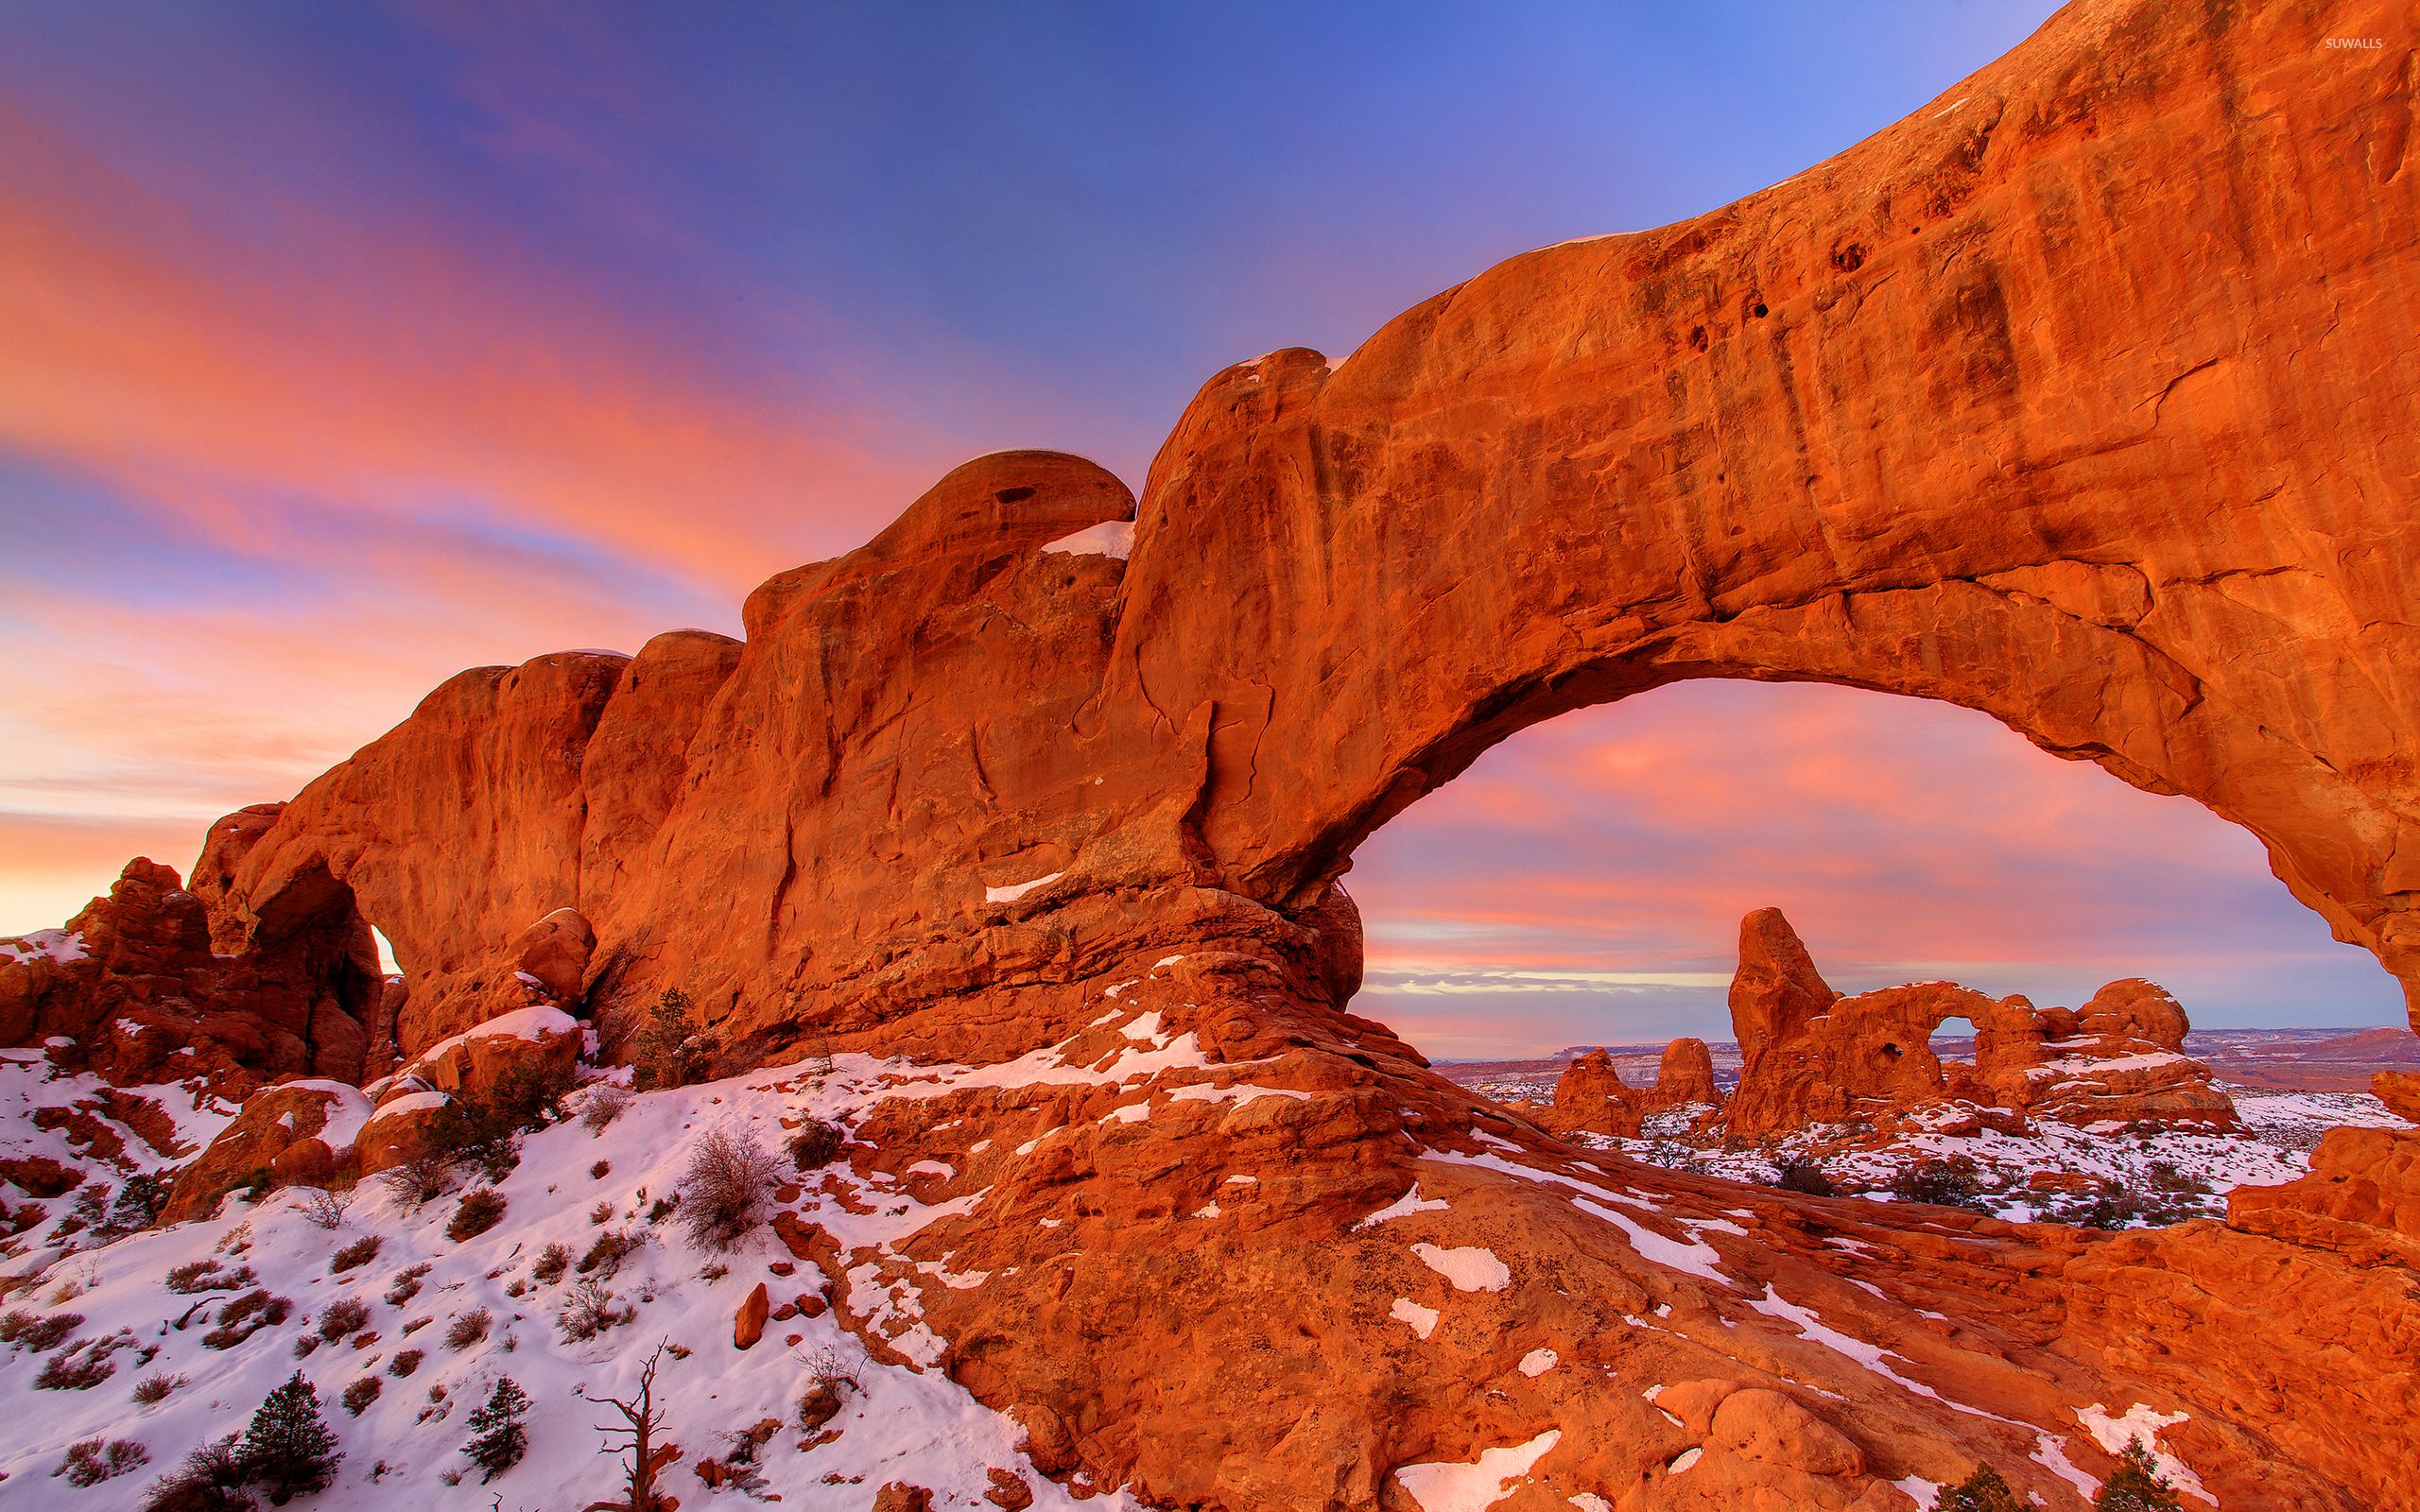 Arches National Park Wallpapers 4k Hd Arches National Park Backgrounds On Wallpaperbat 2457